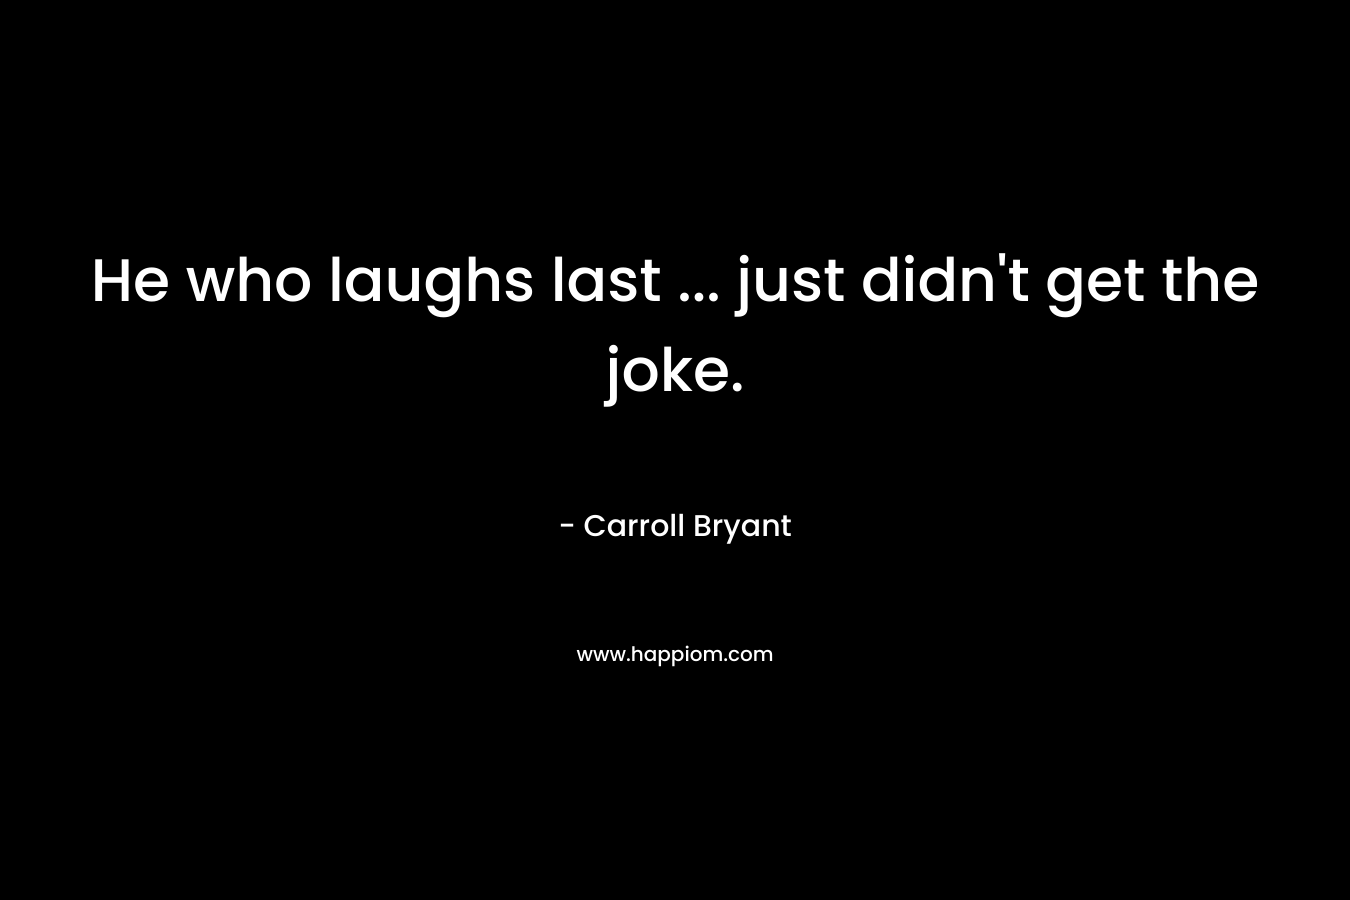 He who laughs last ... just didn't get the joke.